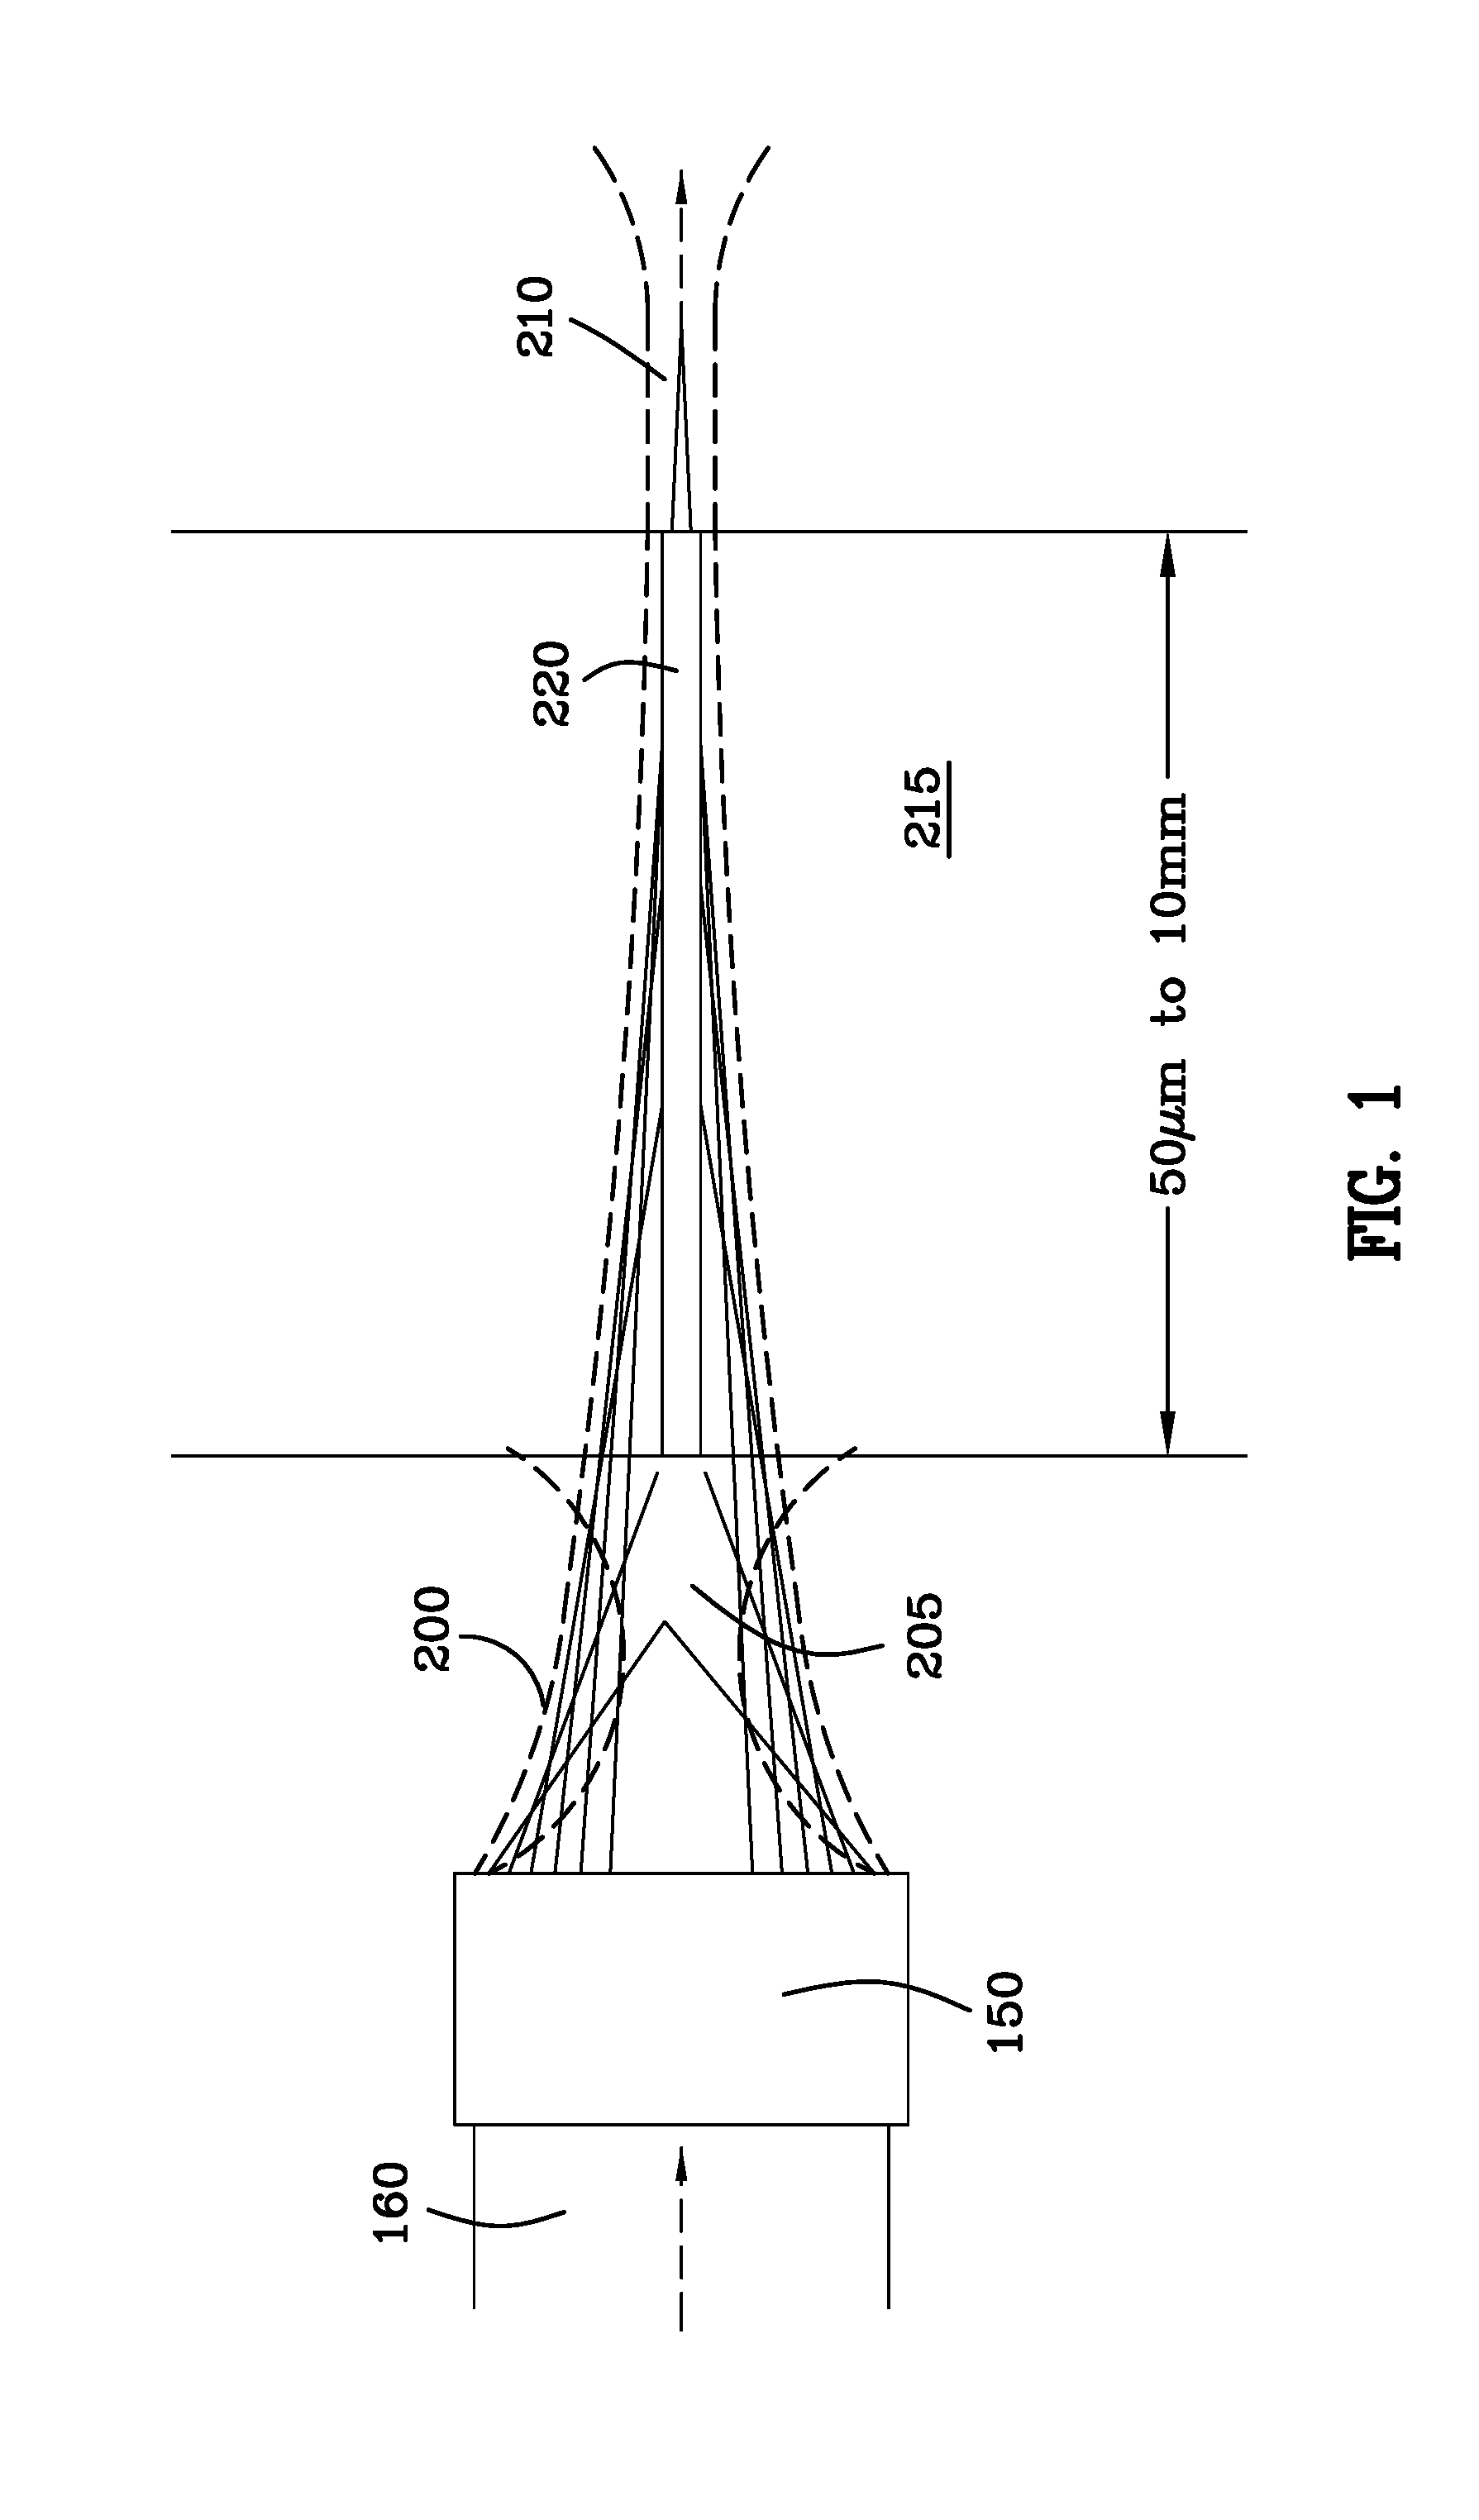 Method and system for scribing brittle material followed by chemical etching